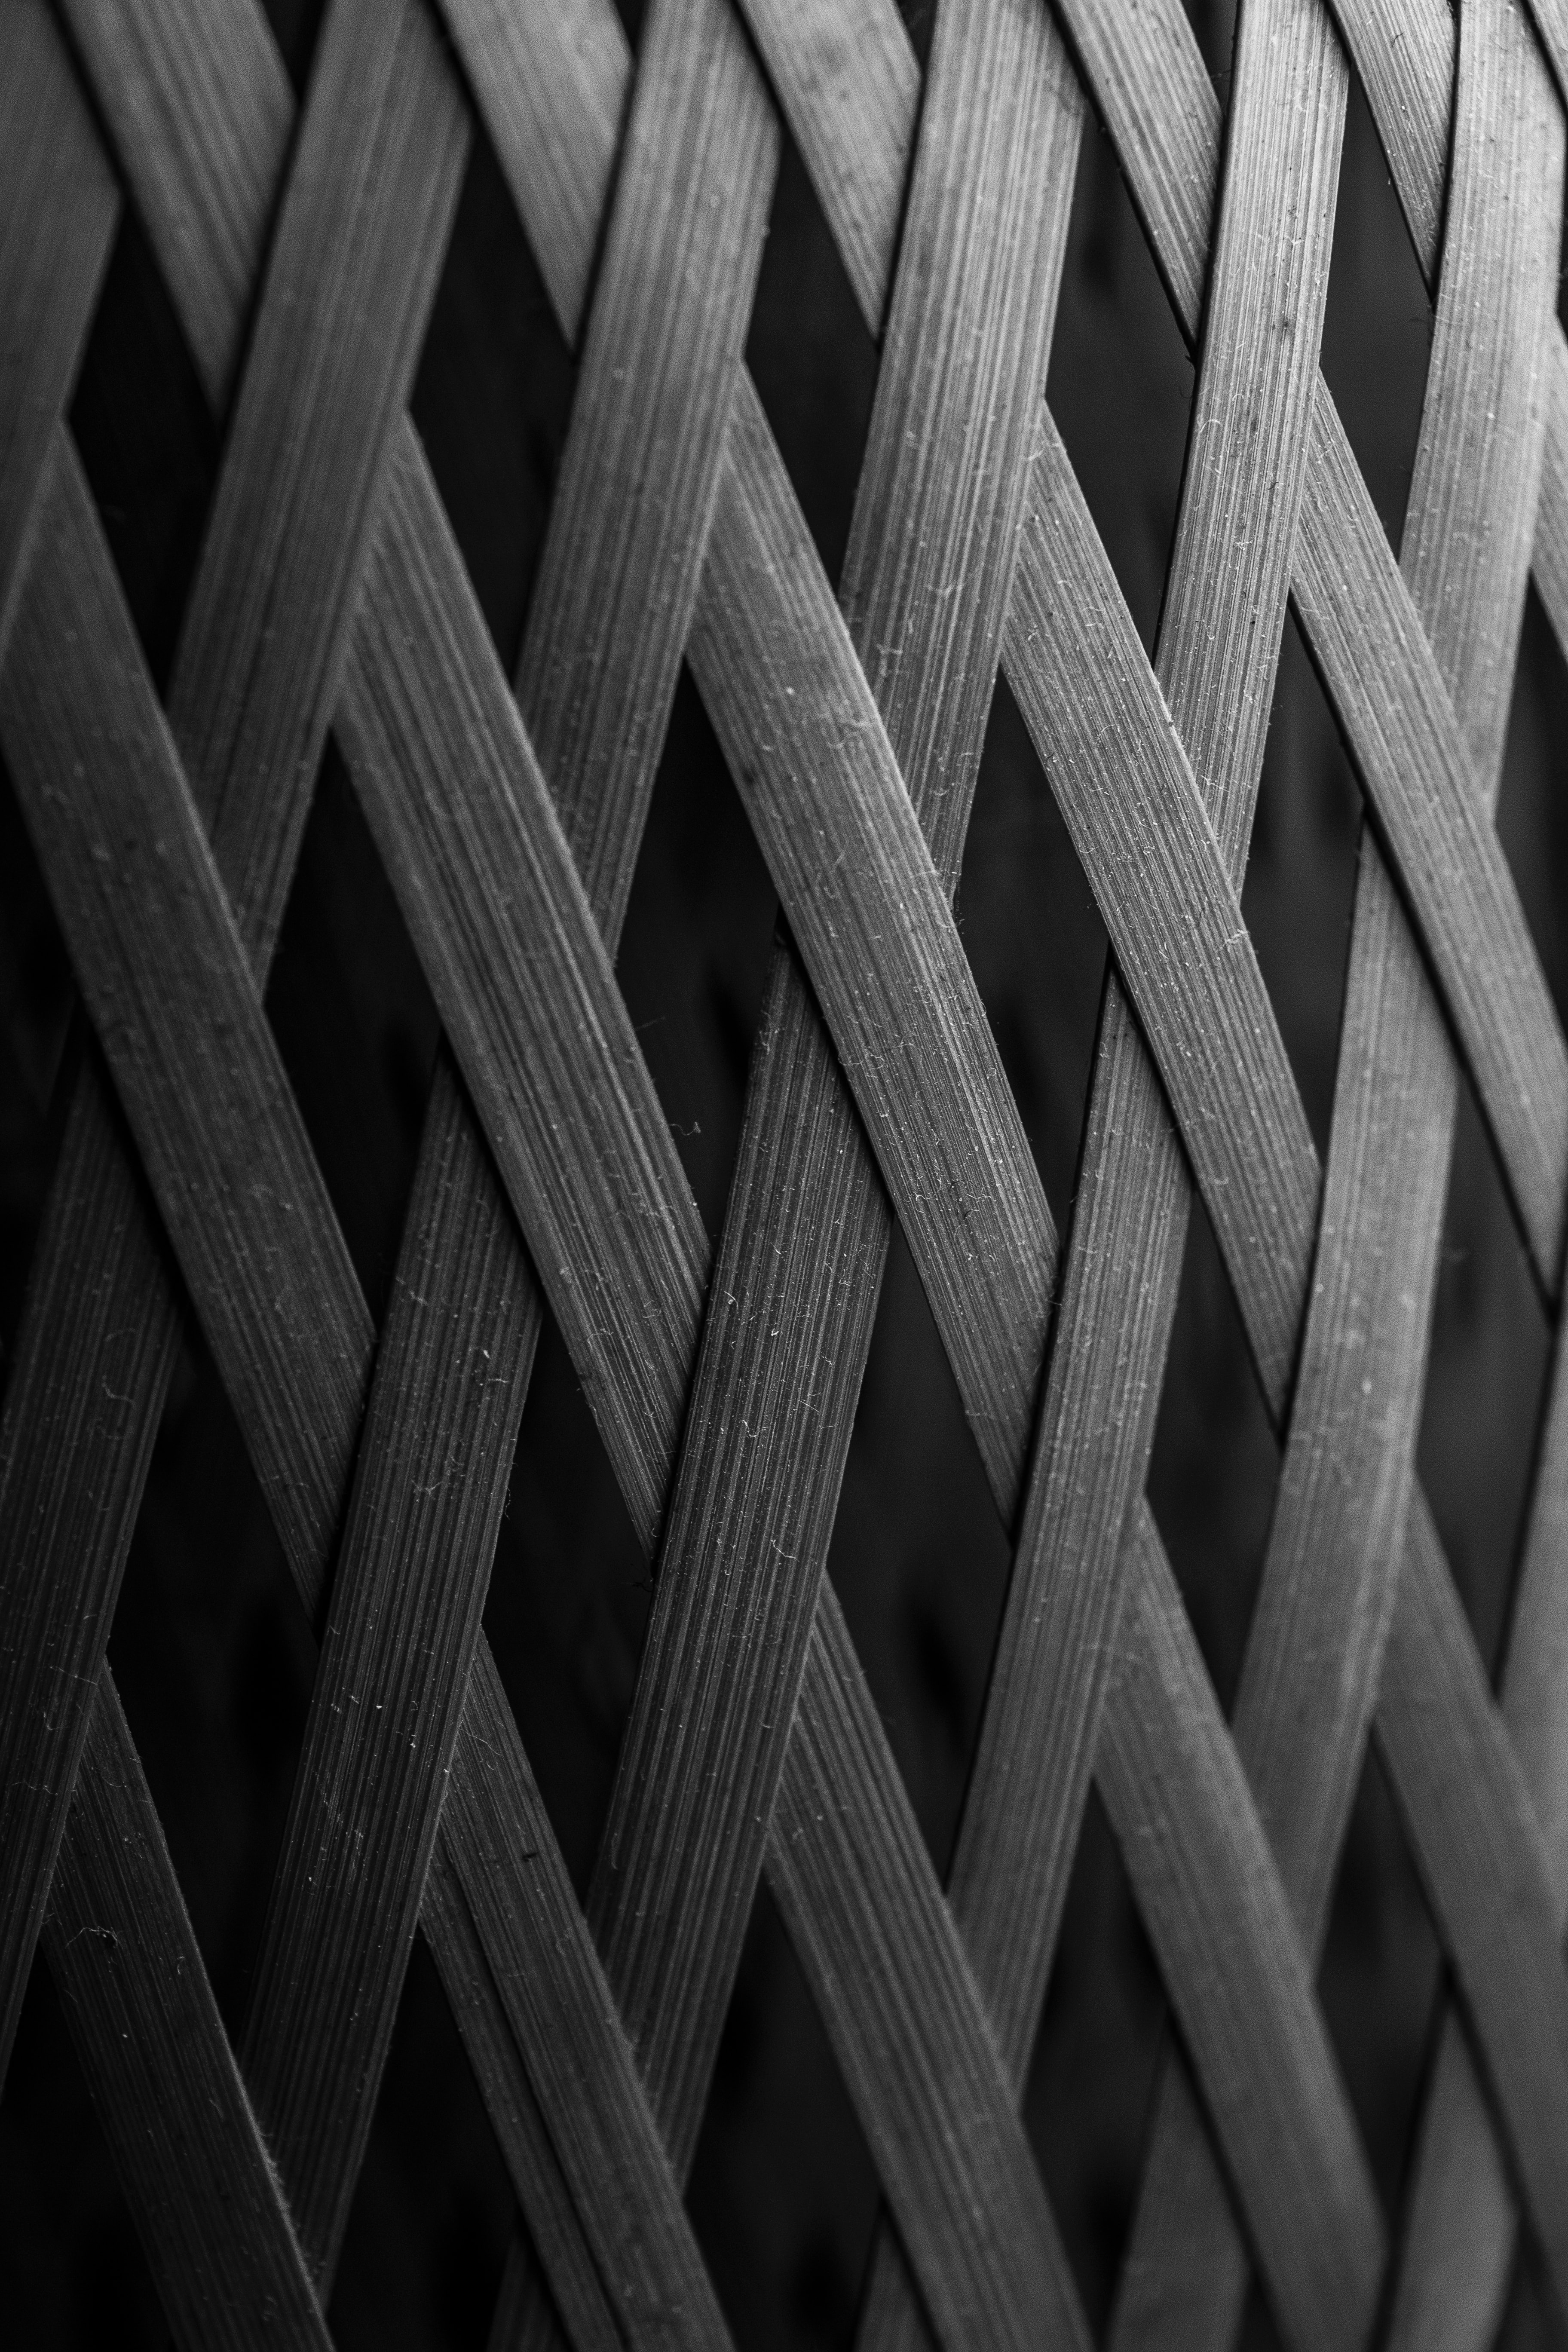 facade, wooden, chb, texture, wood, textures, fence, bw 2160p